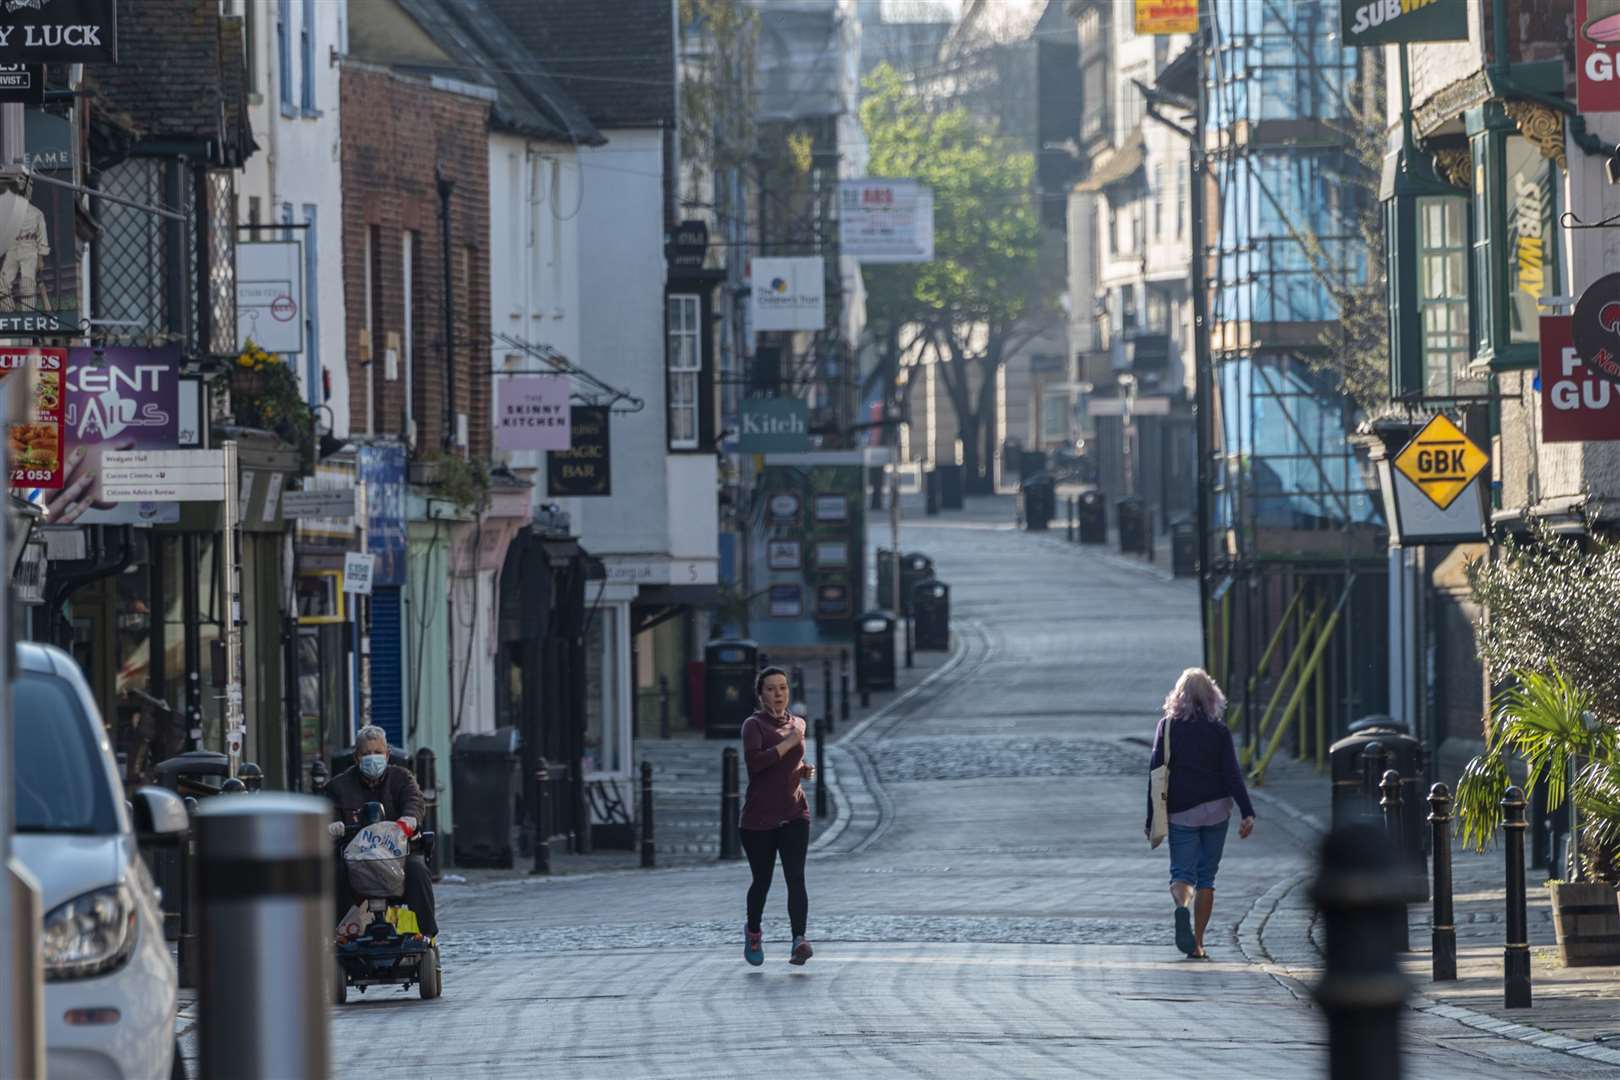 A near-deserted Canterbury High Street during the first lockdown. Picture: Jo Court